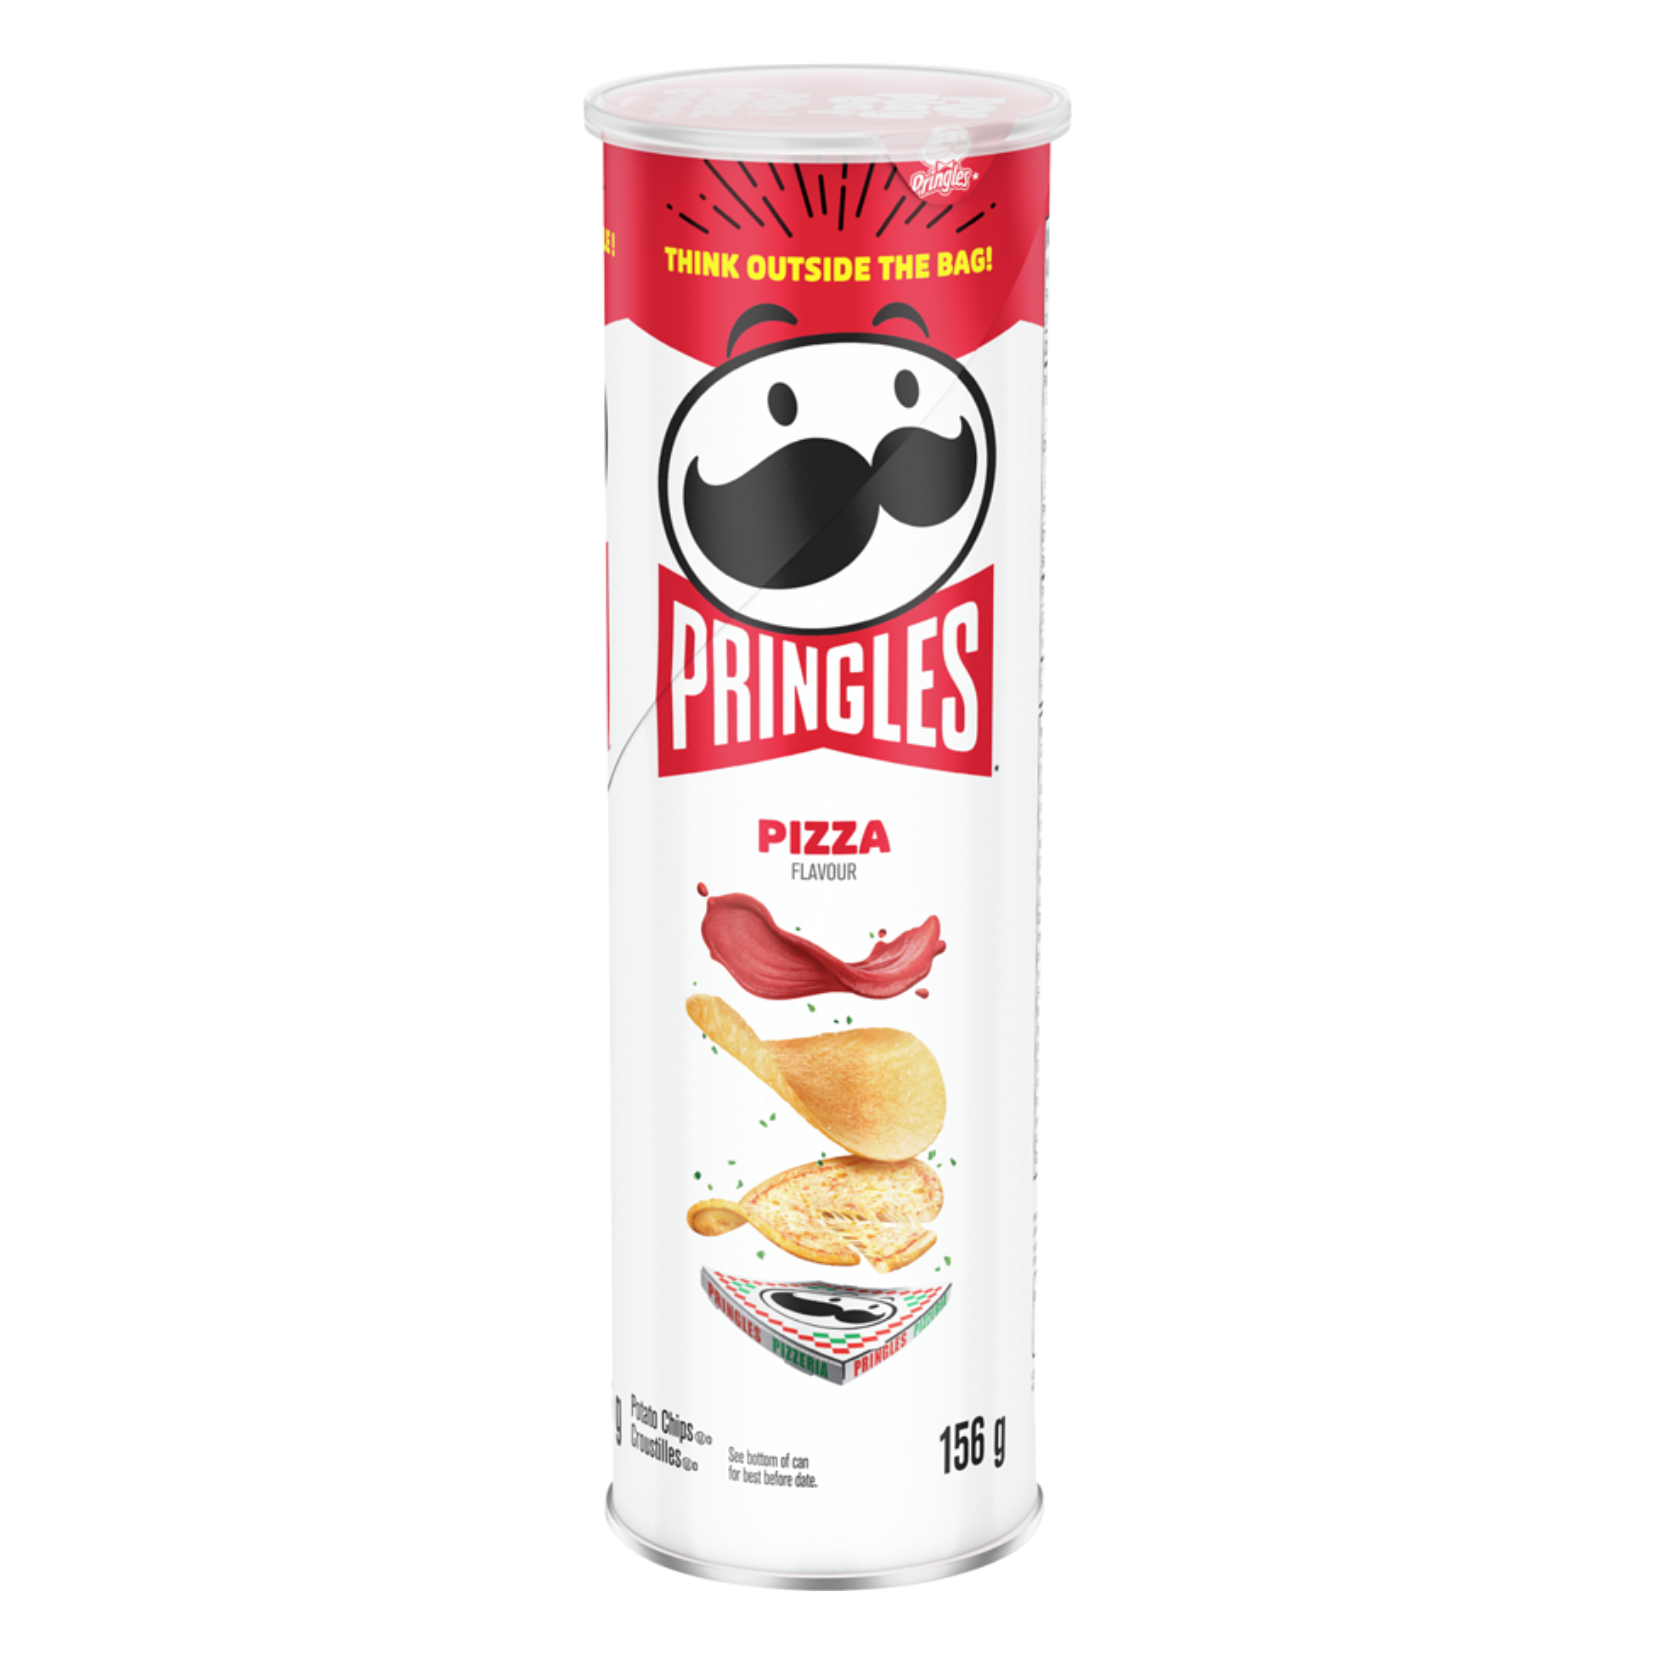 Pringles Pizza Flavour Chips 156g